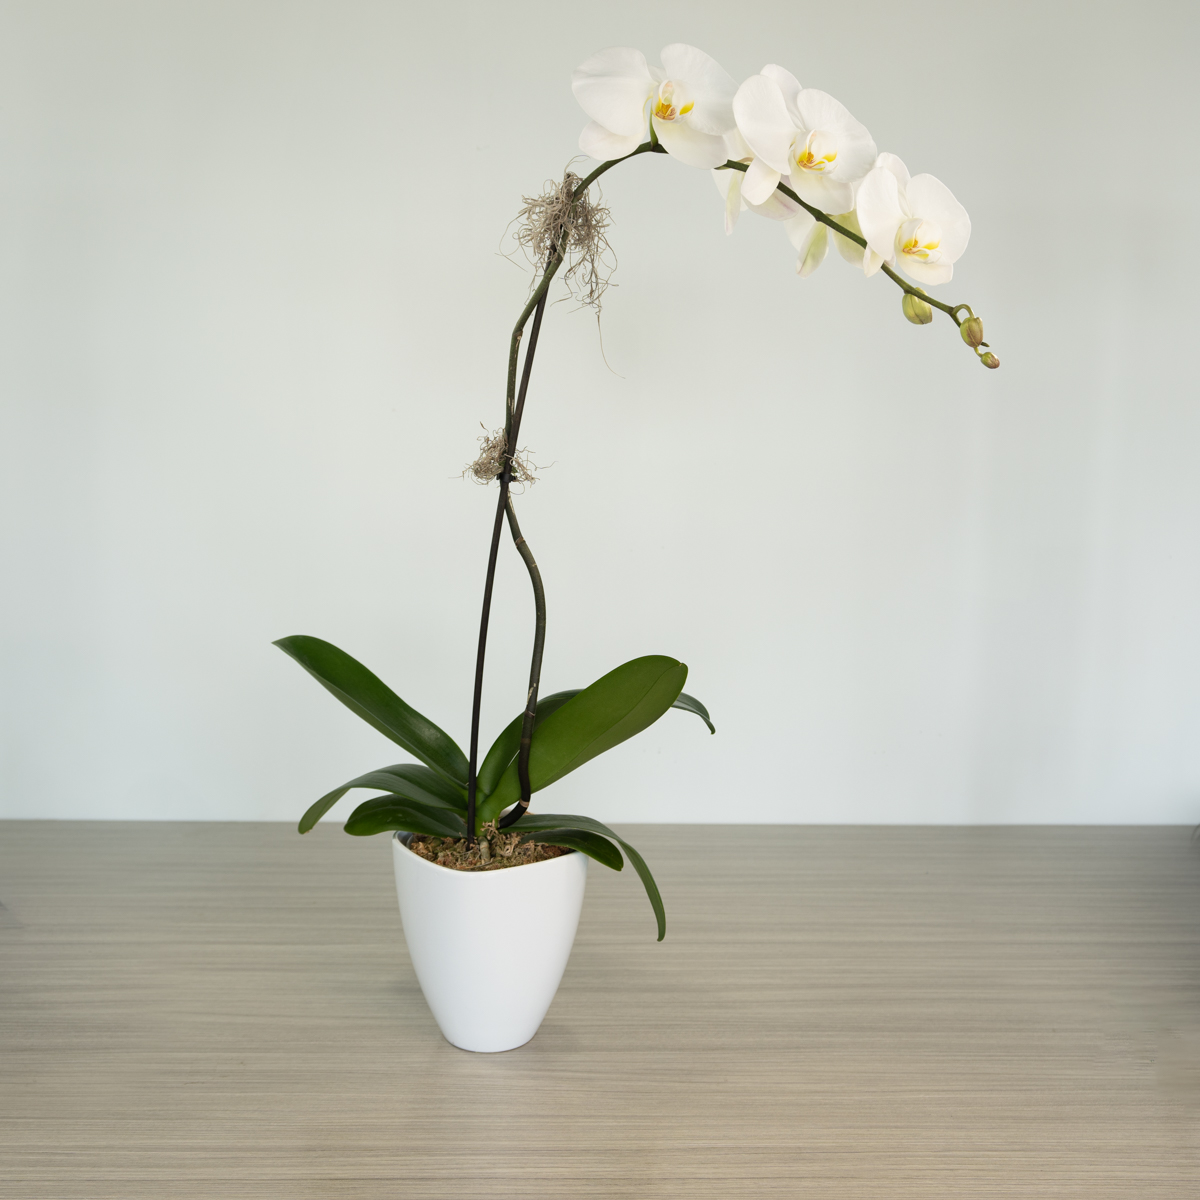 Phalaenopsis orchid plant from Le Bouquet